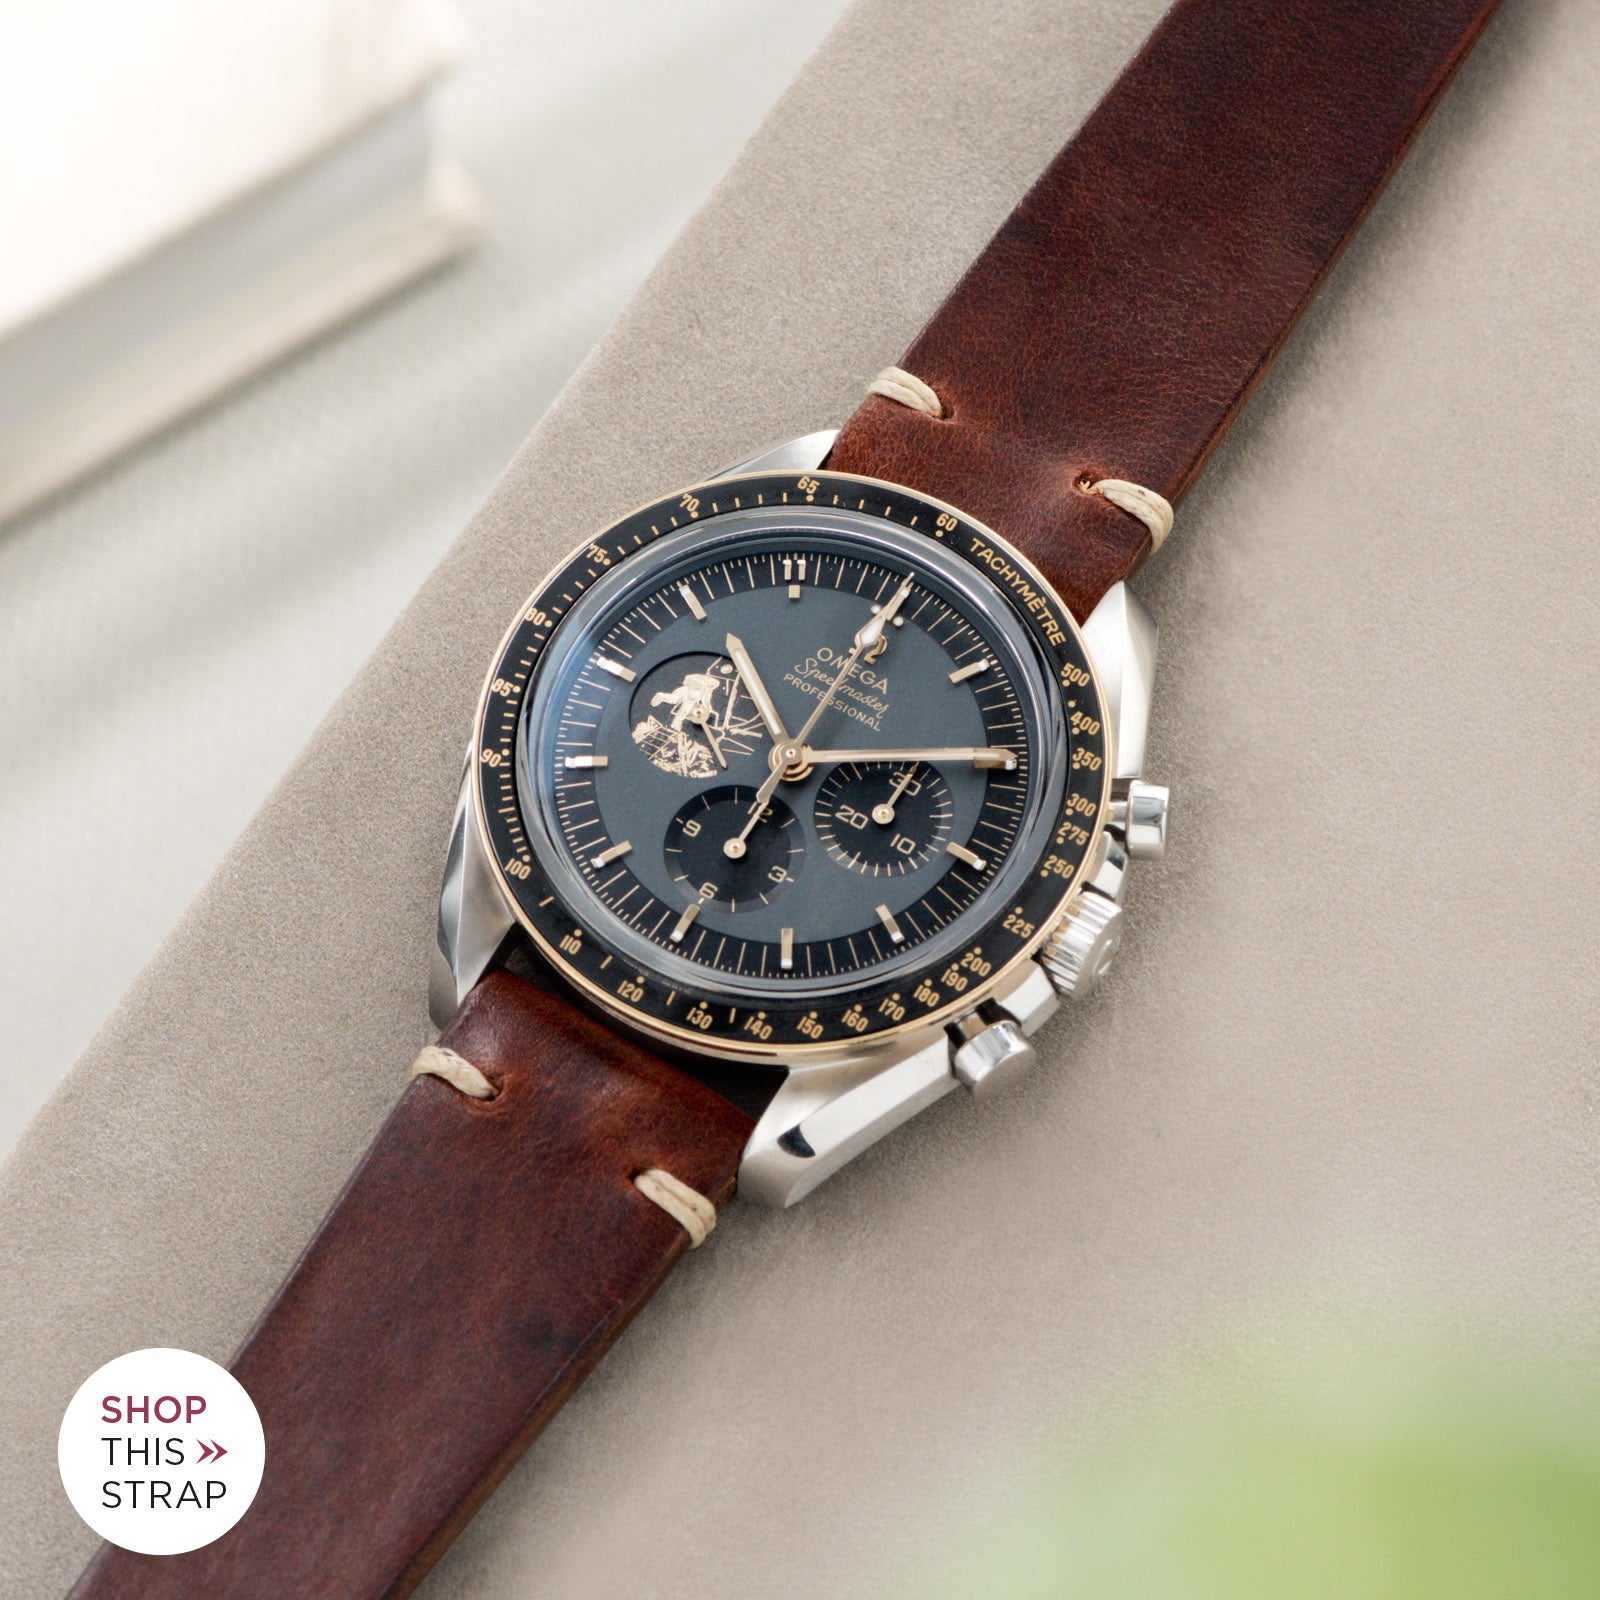 Bulang and Sons_Strap Guide_Omega Speedmaster Apollo 11 50TH Anniversary Watch_Siena Brown Leather Watch Strap